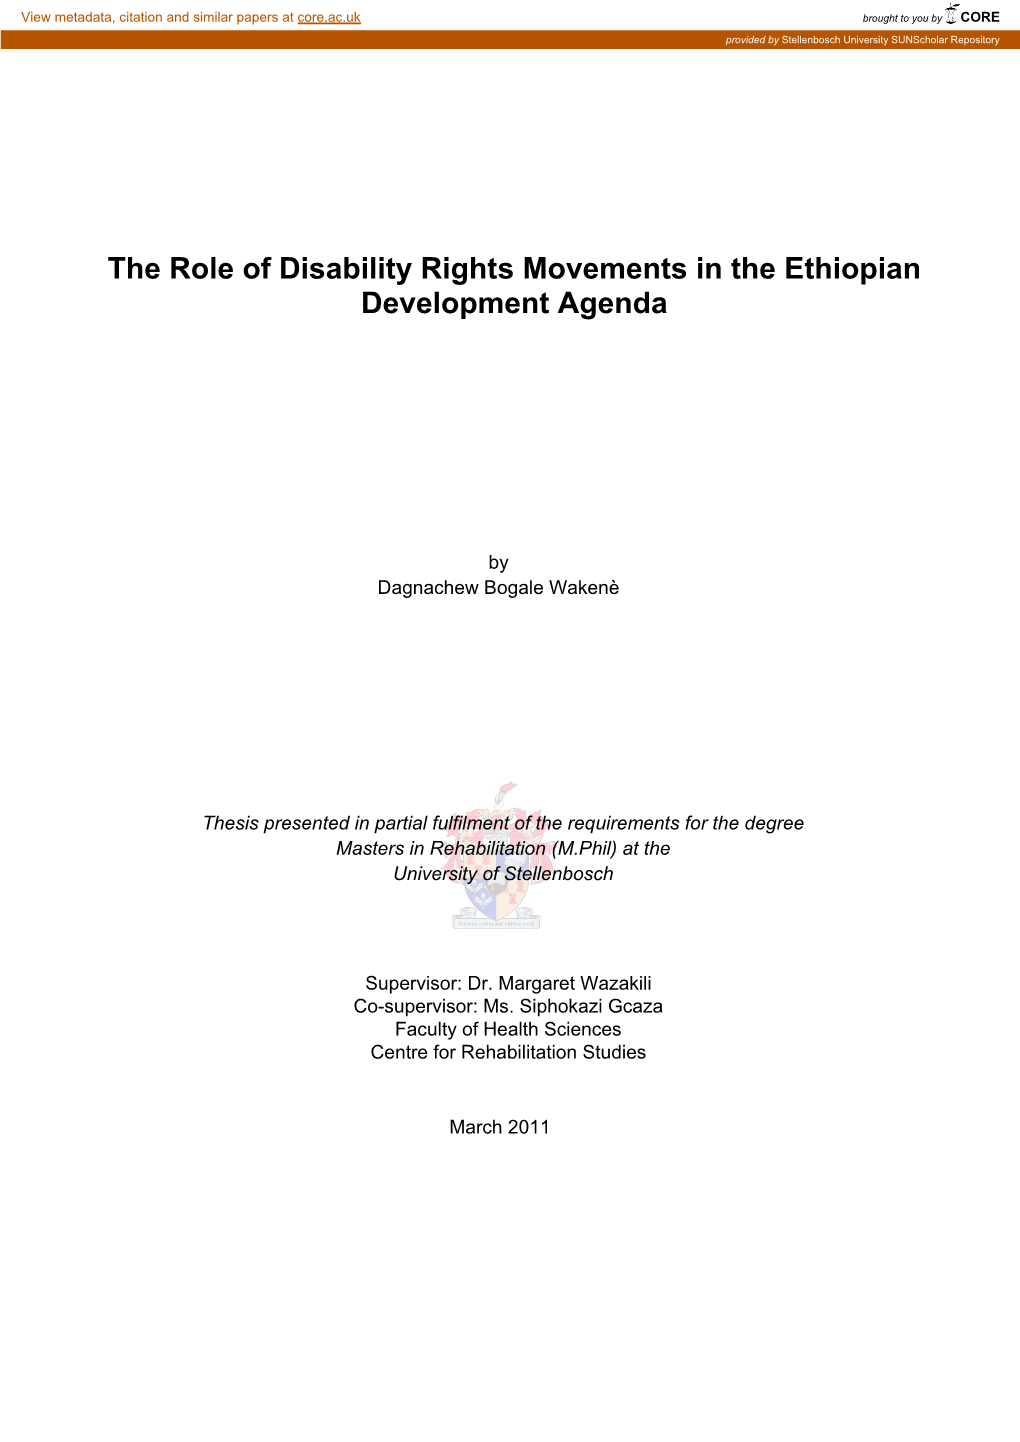 The Role of Disability Rights Movements in the Ethiopian Development Agenda